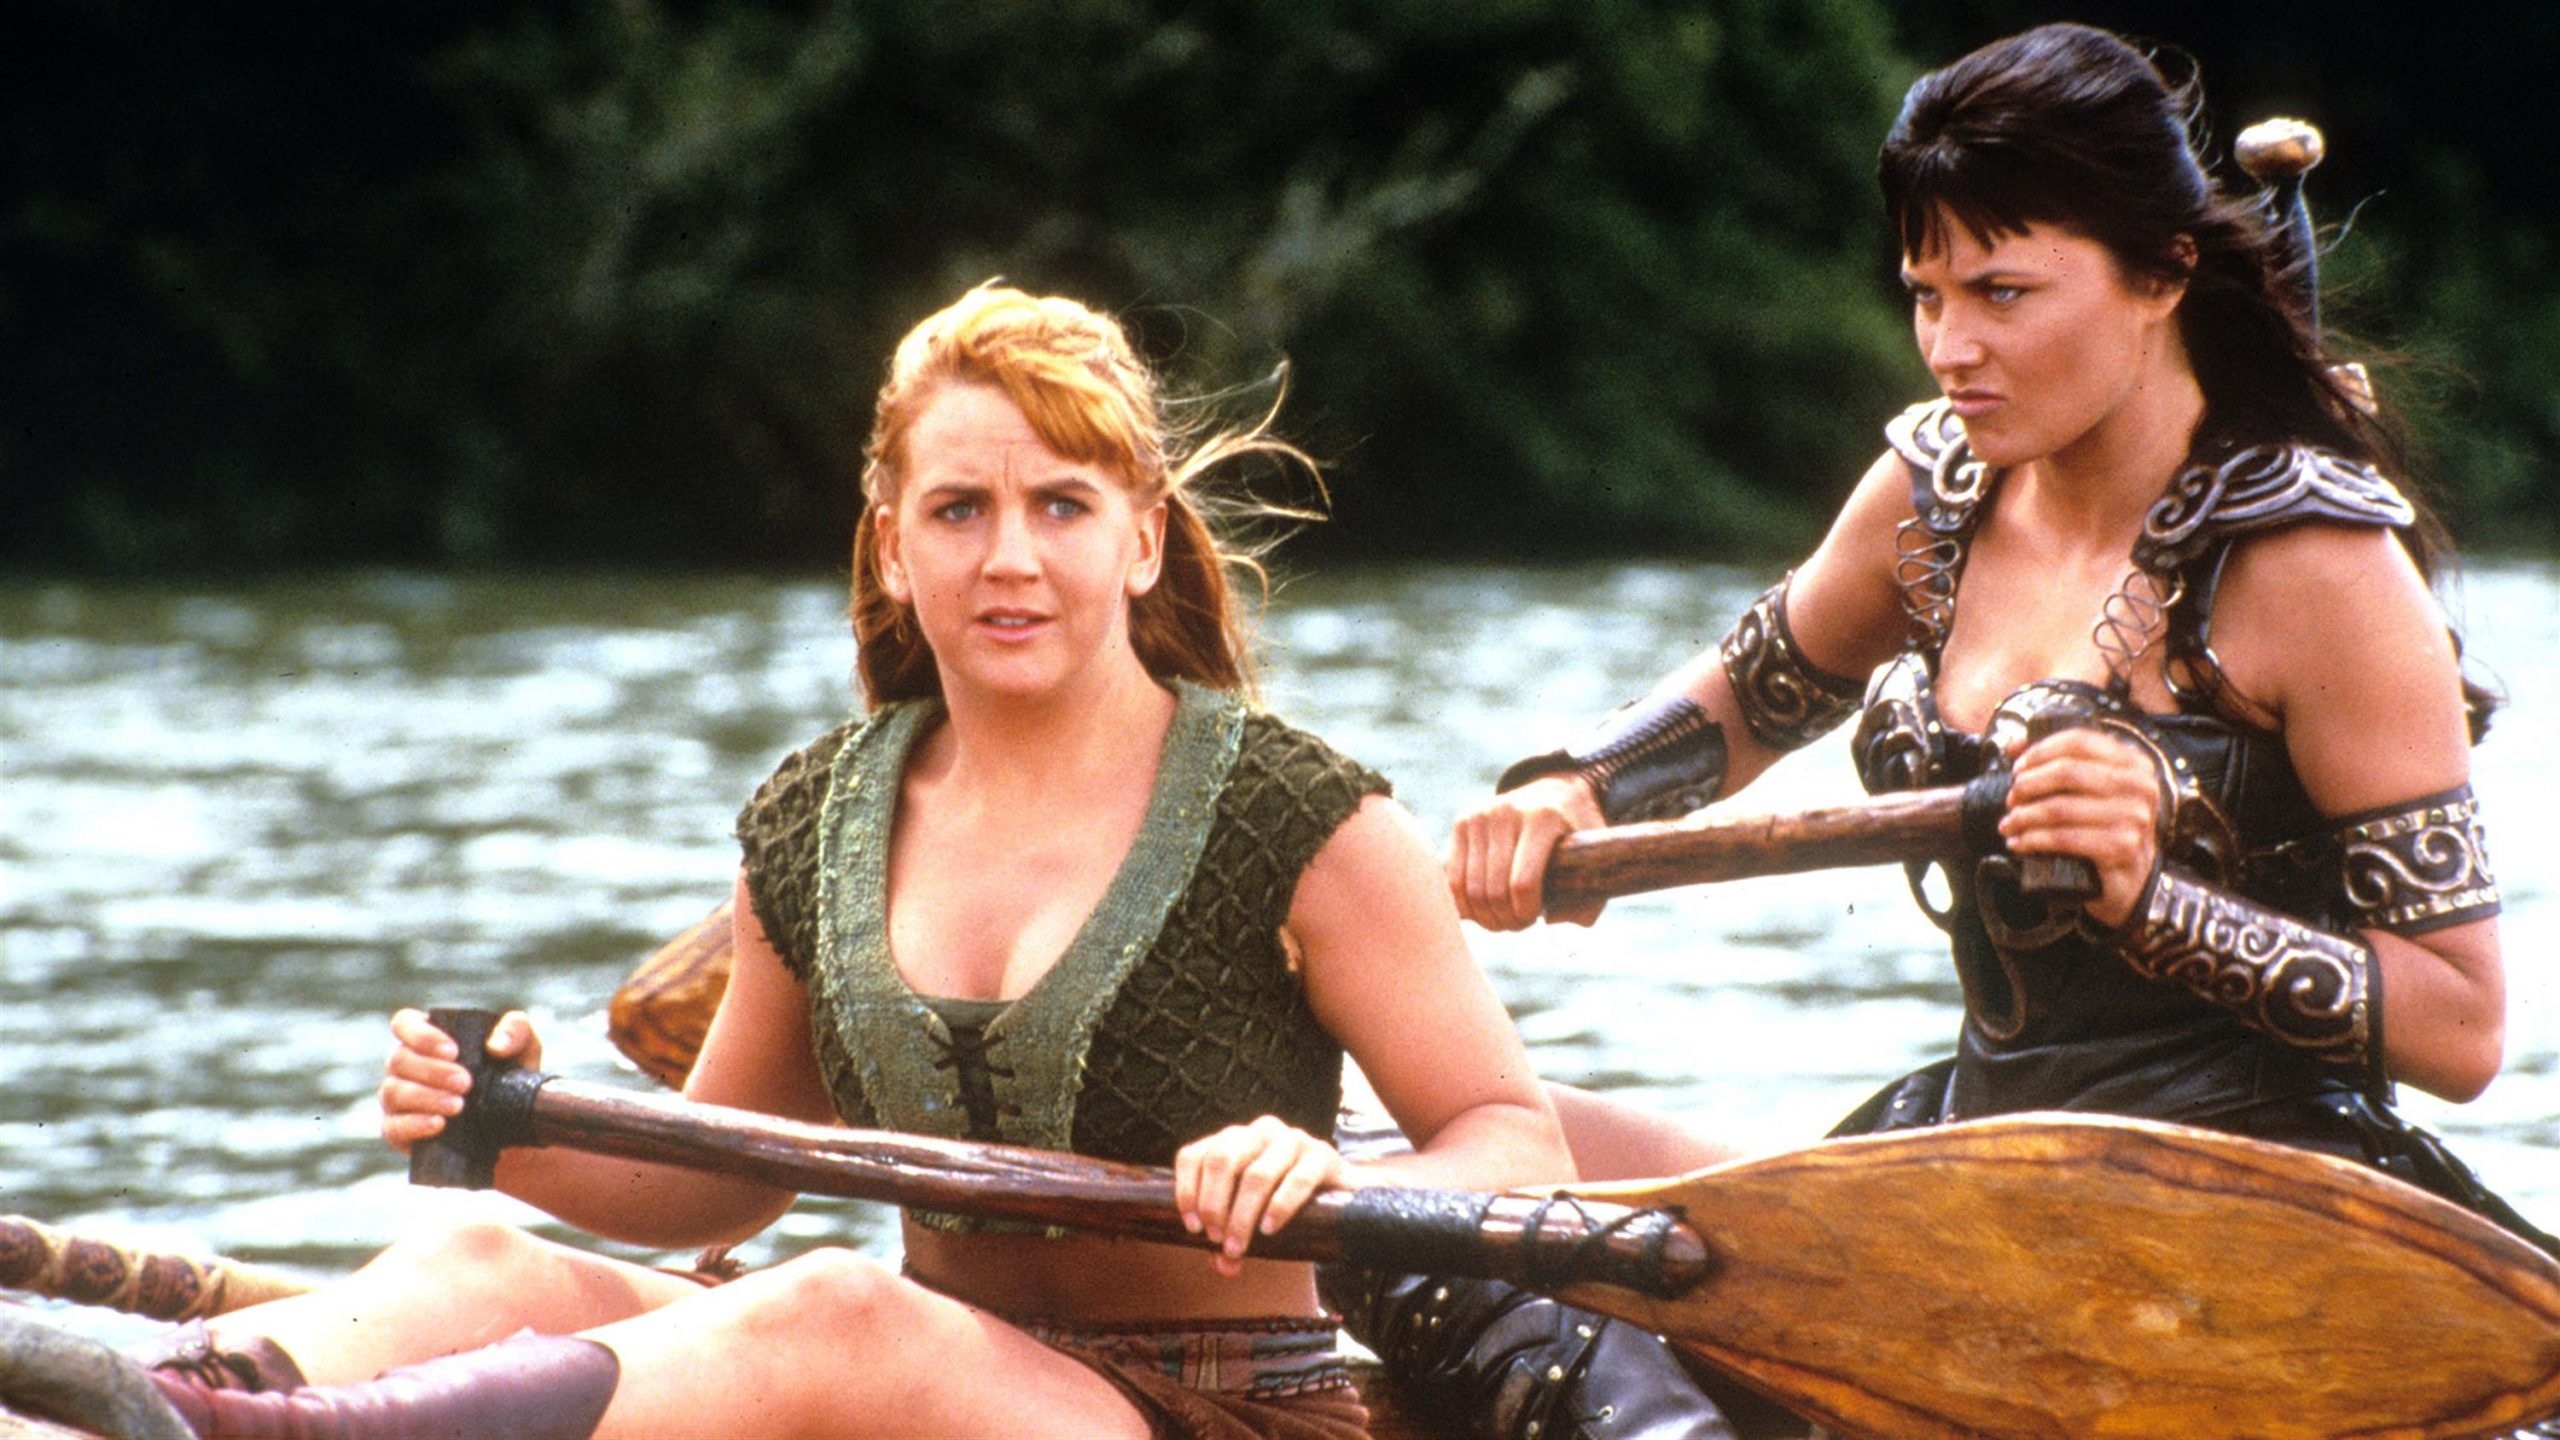 Xena: Warrior Princess (TV Series): Renee O'Connor as Gabrielle, A subordinate and a friend of the character played by Lucy Lawless. 2560x1440 HD Wallpaper.